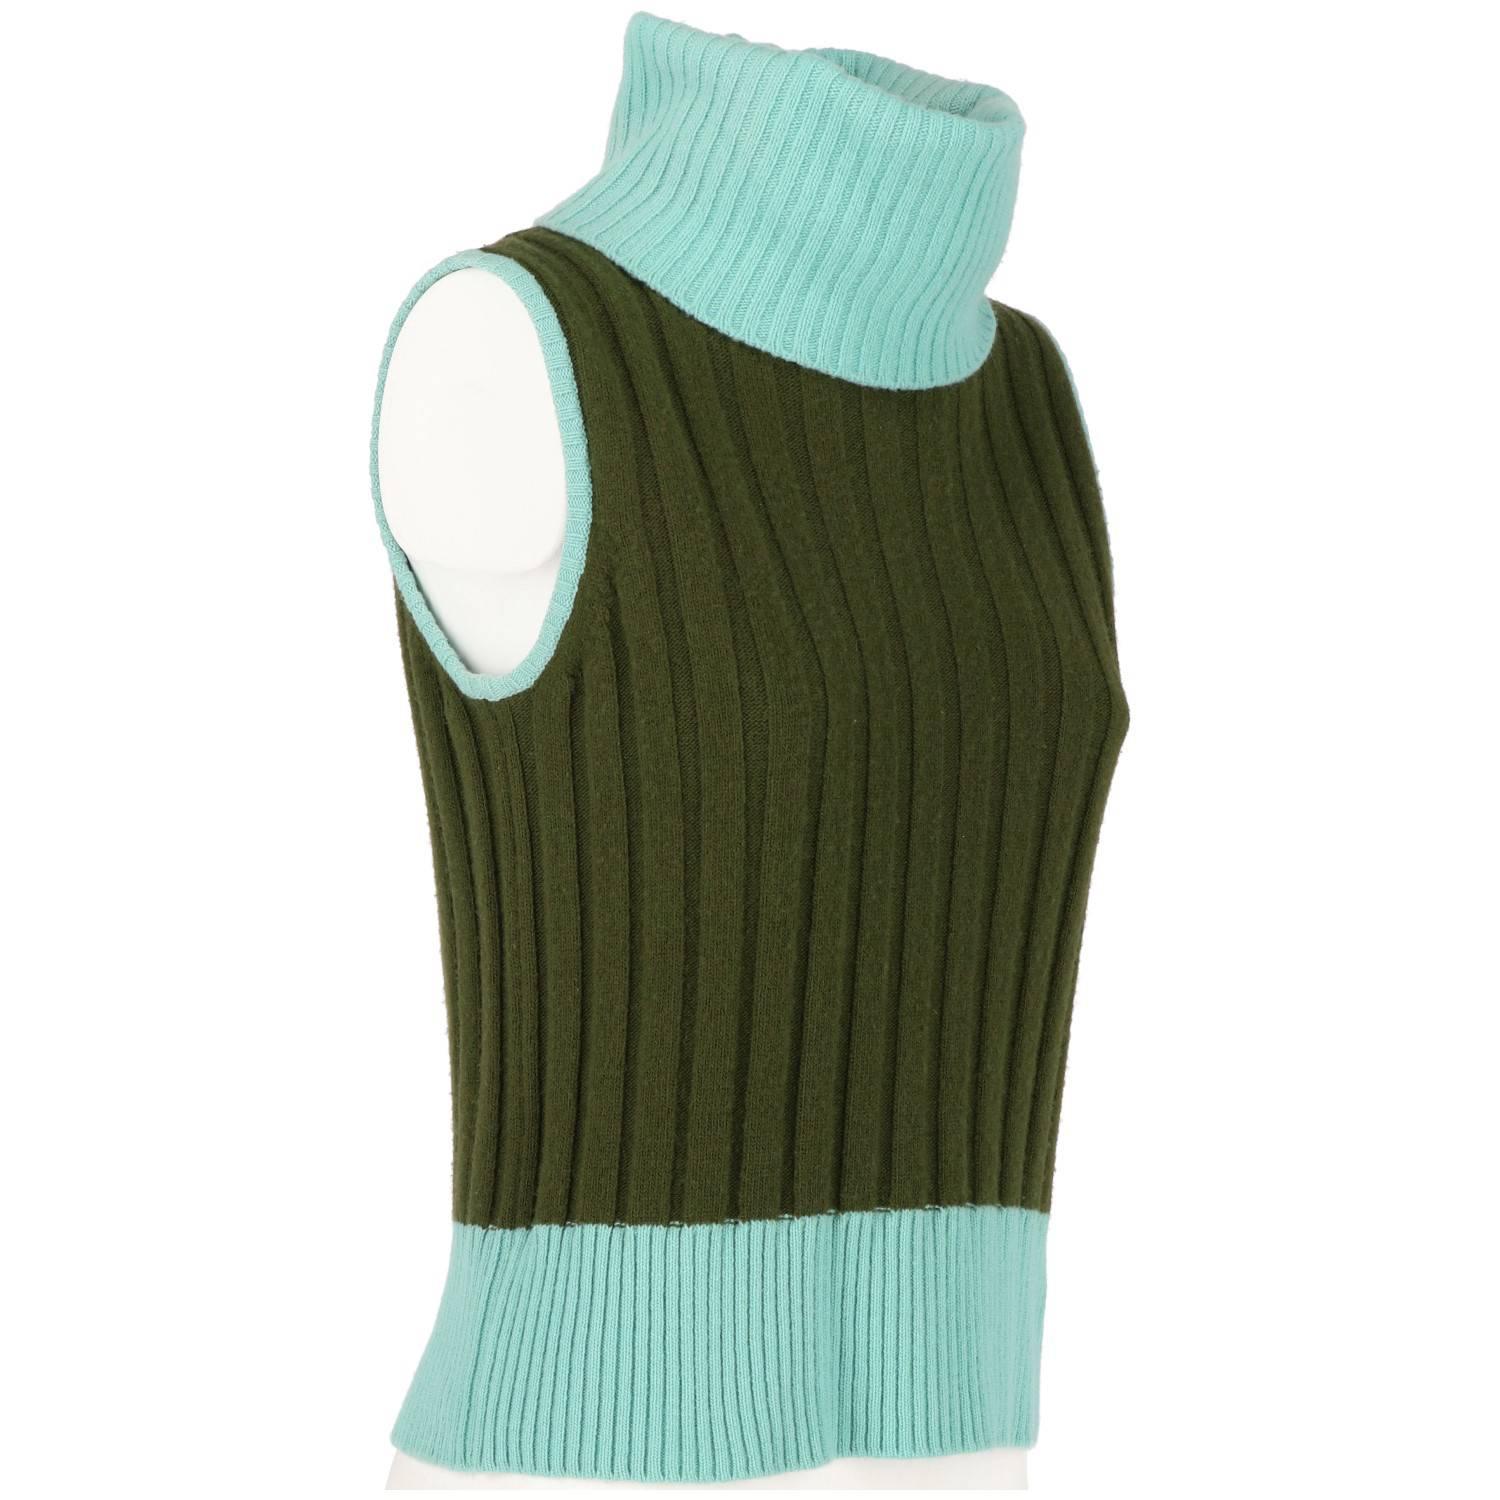 Gianni Versace dark green cashmere and wool sleeveless sweater, with mint green collar and hems. It features ribbed roll neck and a ribbed knit. Button fastening on the back.
The item is vintage, it was produced in the 90s and is in good